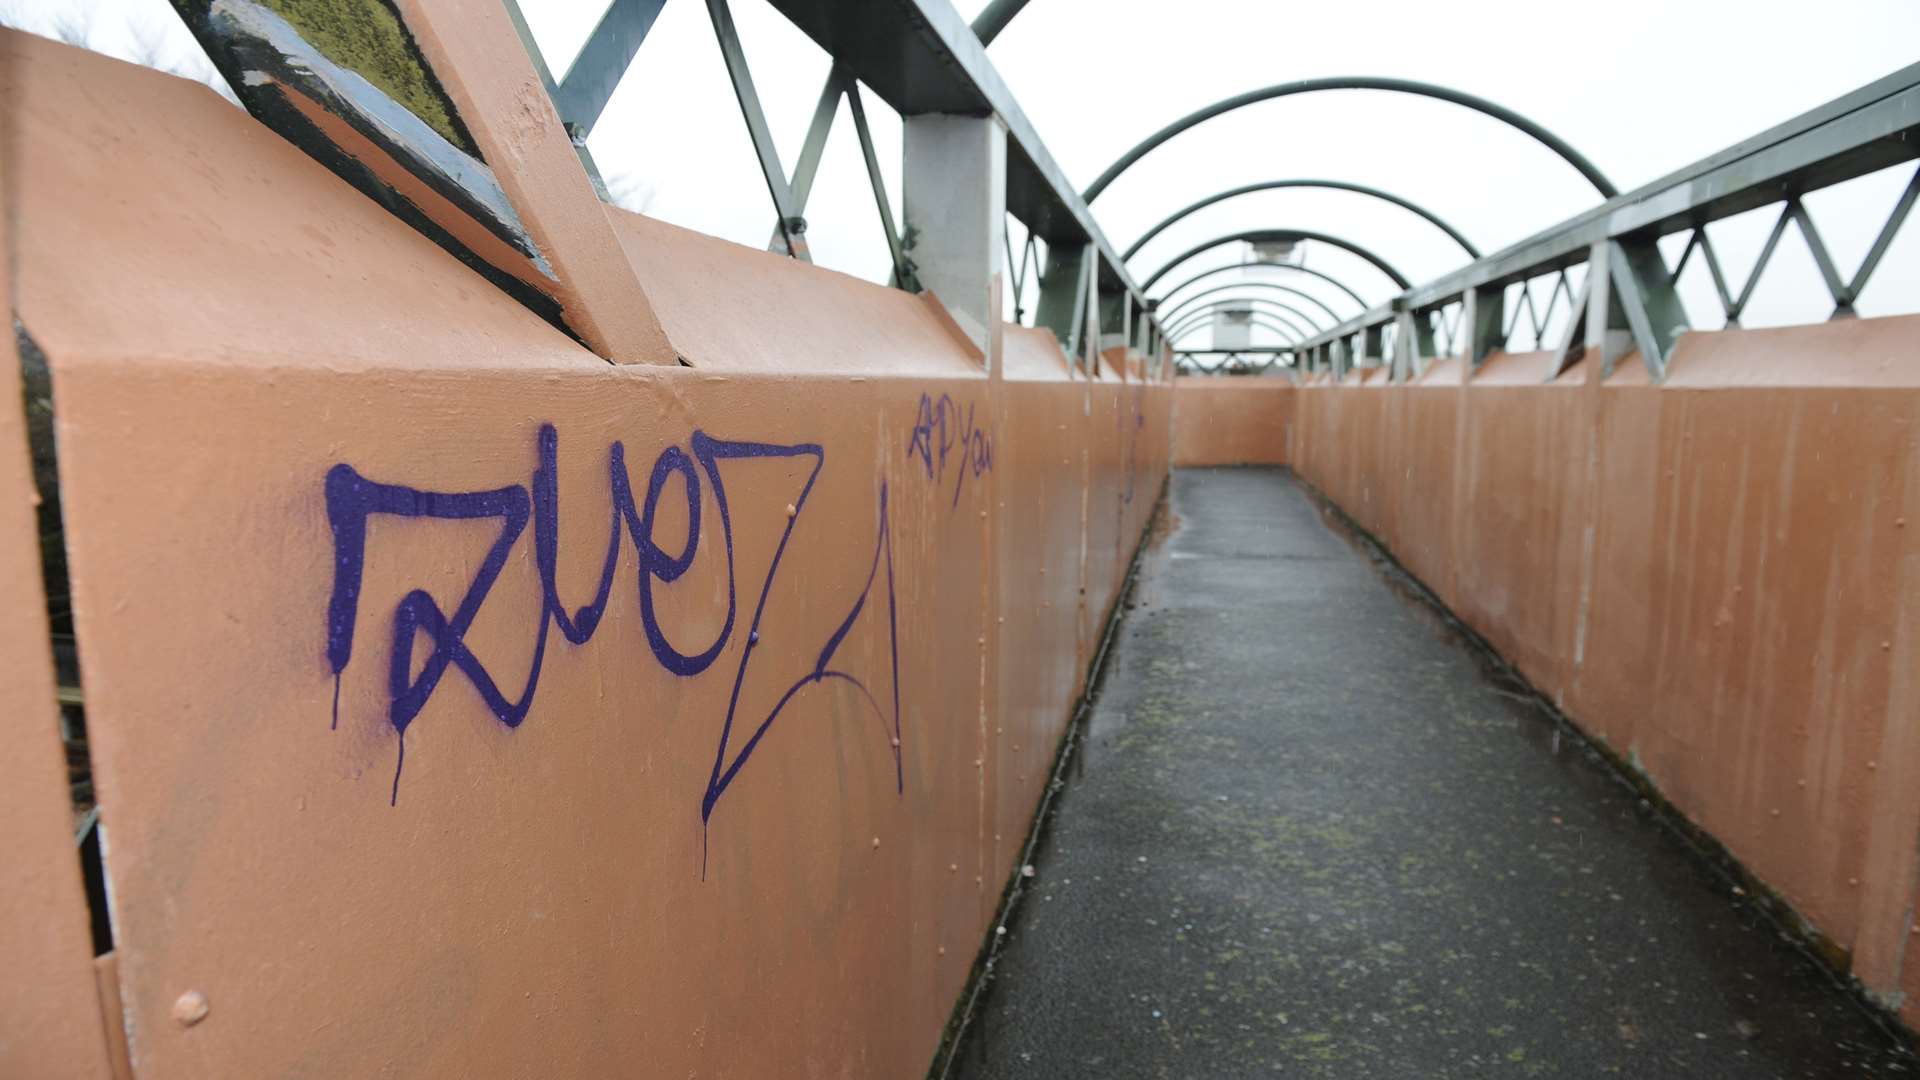 The bridge and subway were daubed with graffiti under 24 hours after they were repainted.